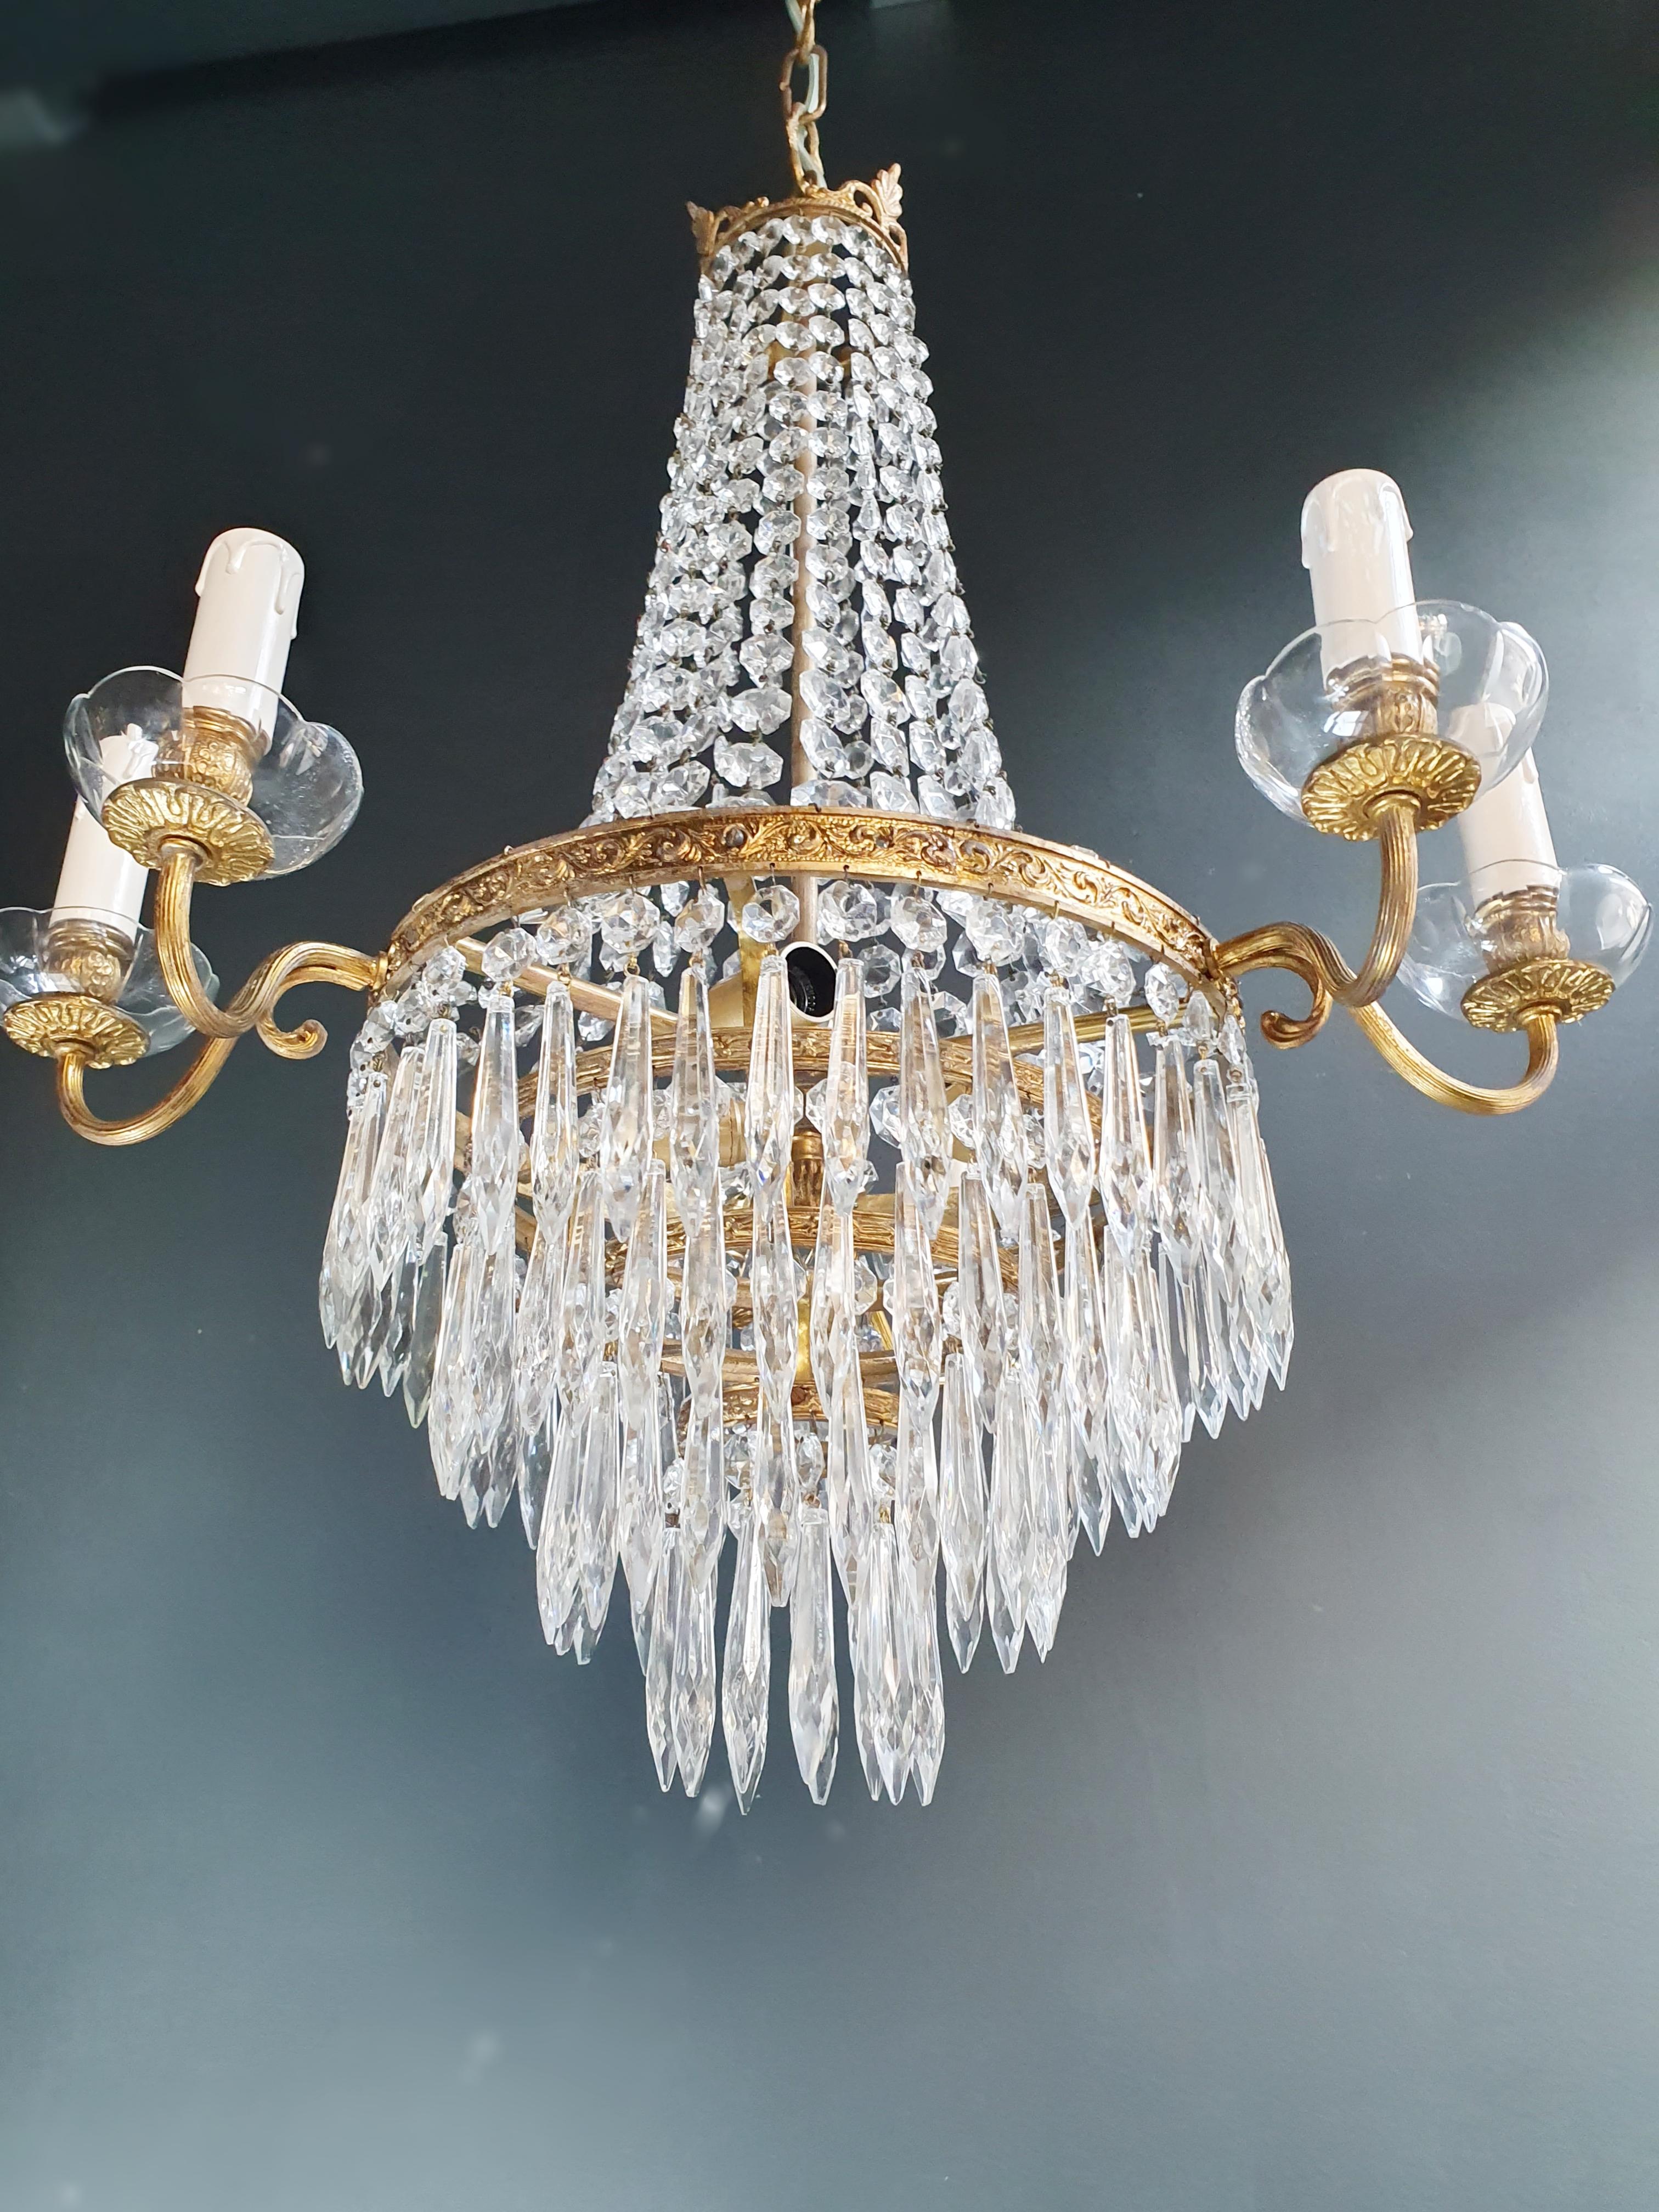 Fine Brass Empire Sac a Pearl Chandelier Crystal Lustre Ceiling Lamp Antique 1